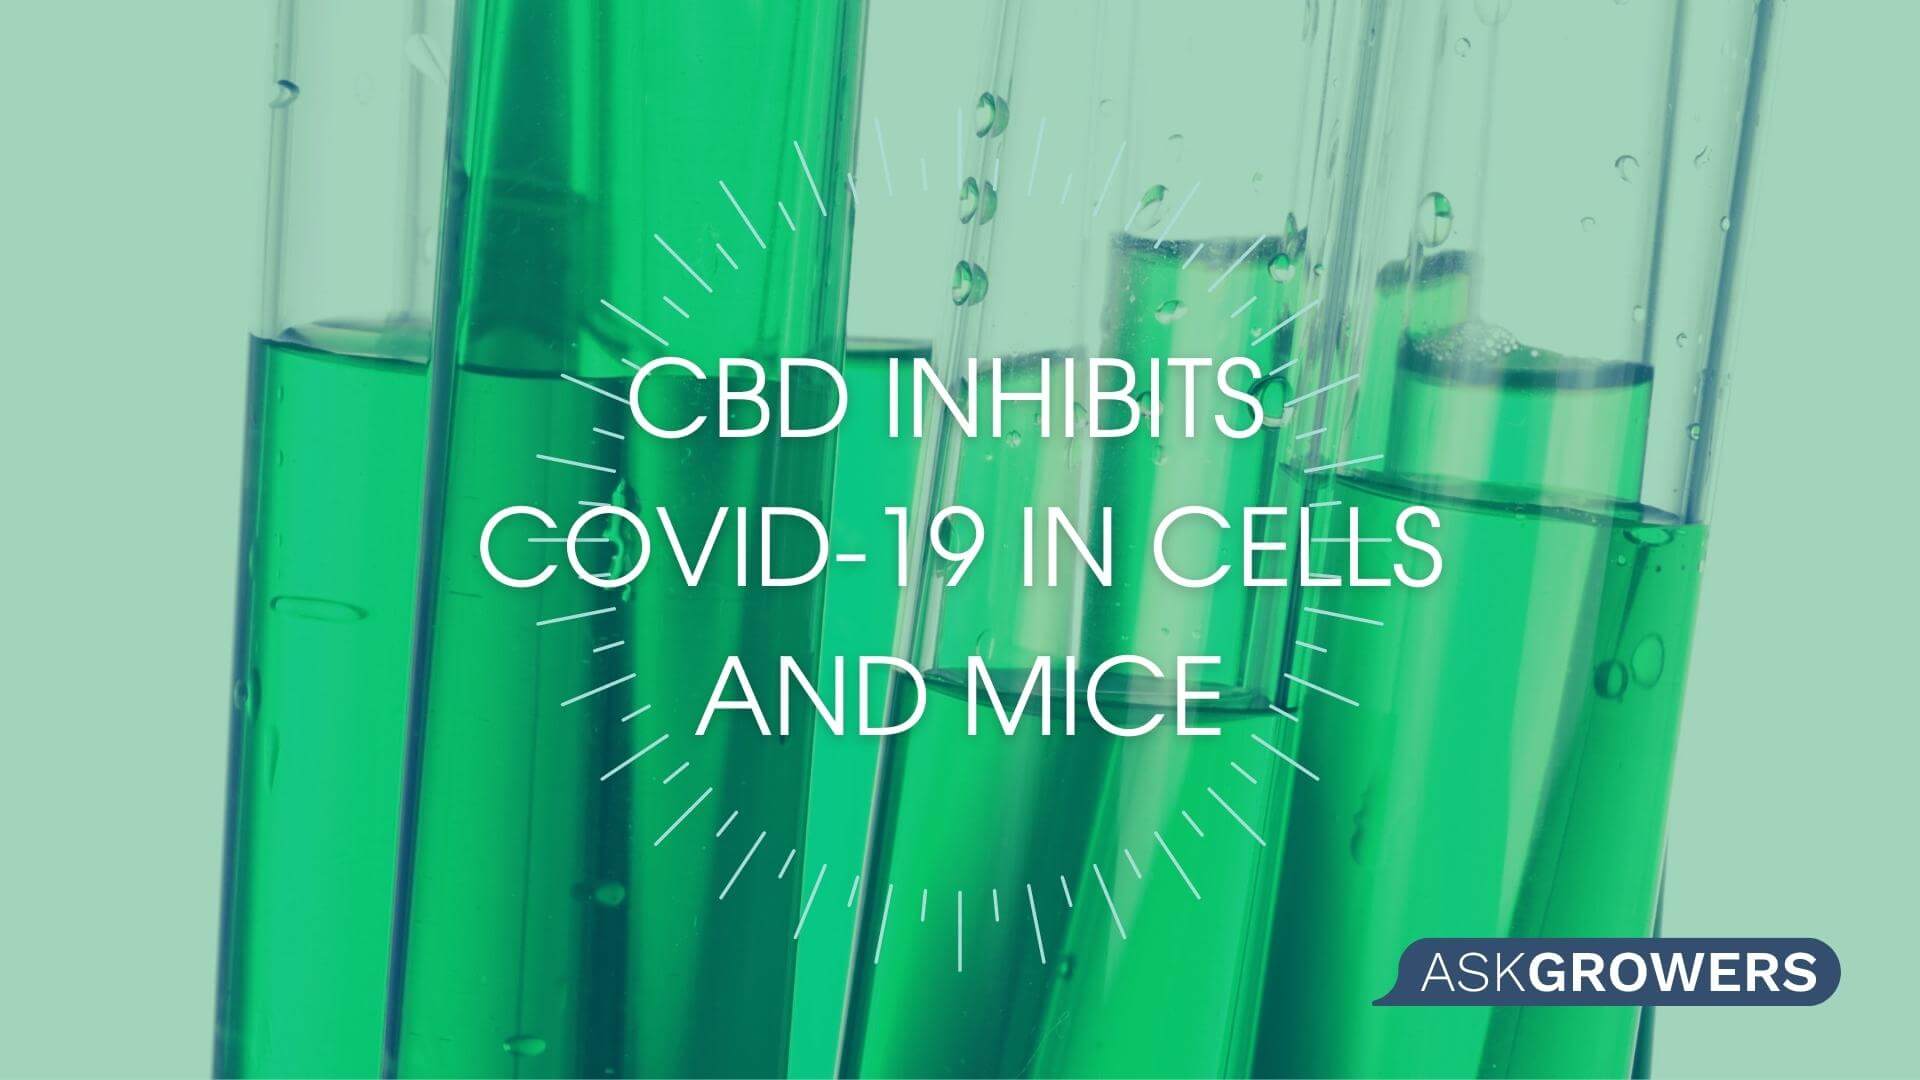 Researchers Advocate CBD Clinical Trials to Prevent COVID-19 Based on Encouraging Evidence